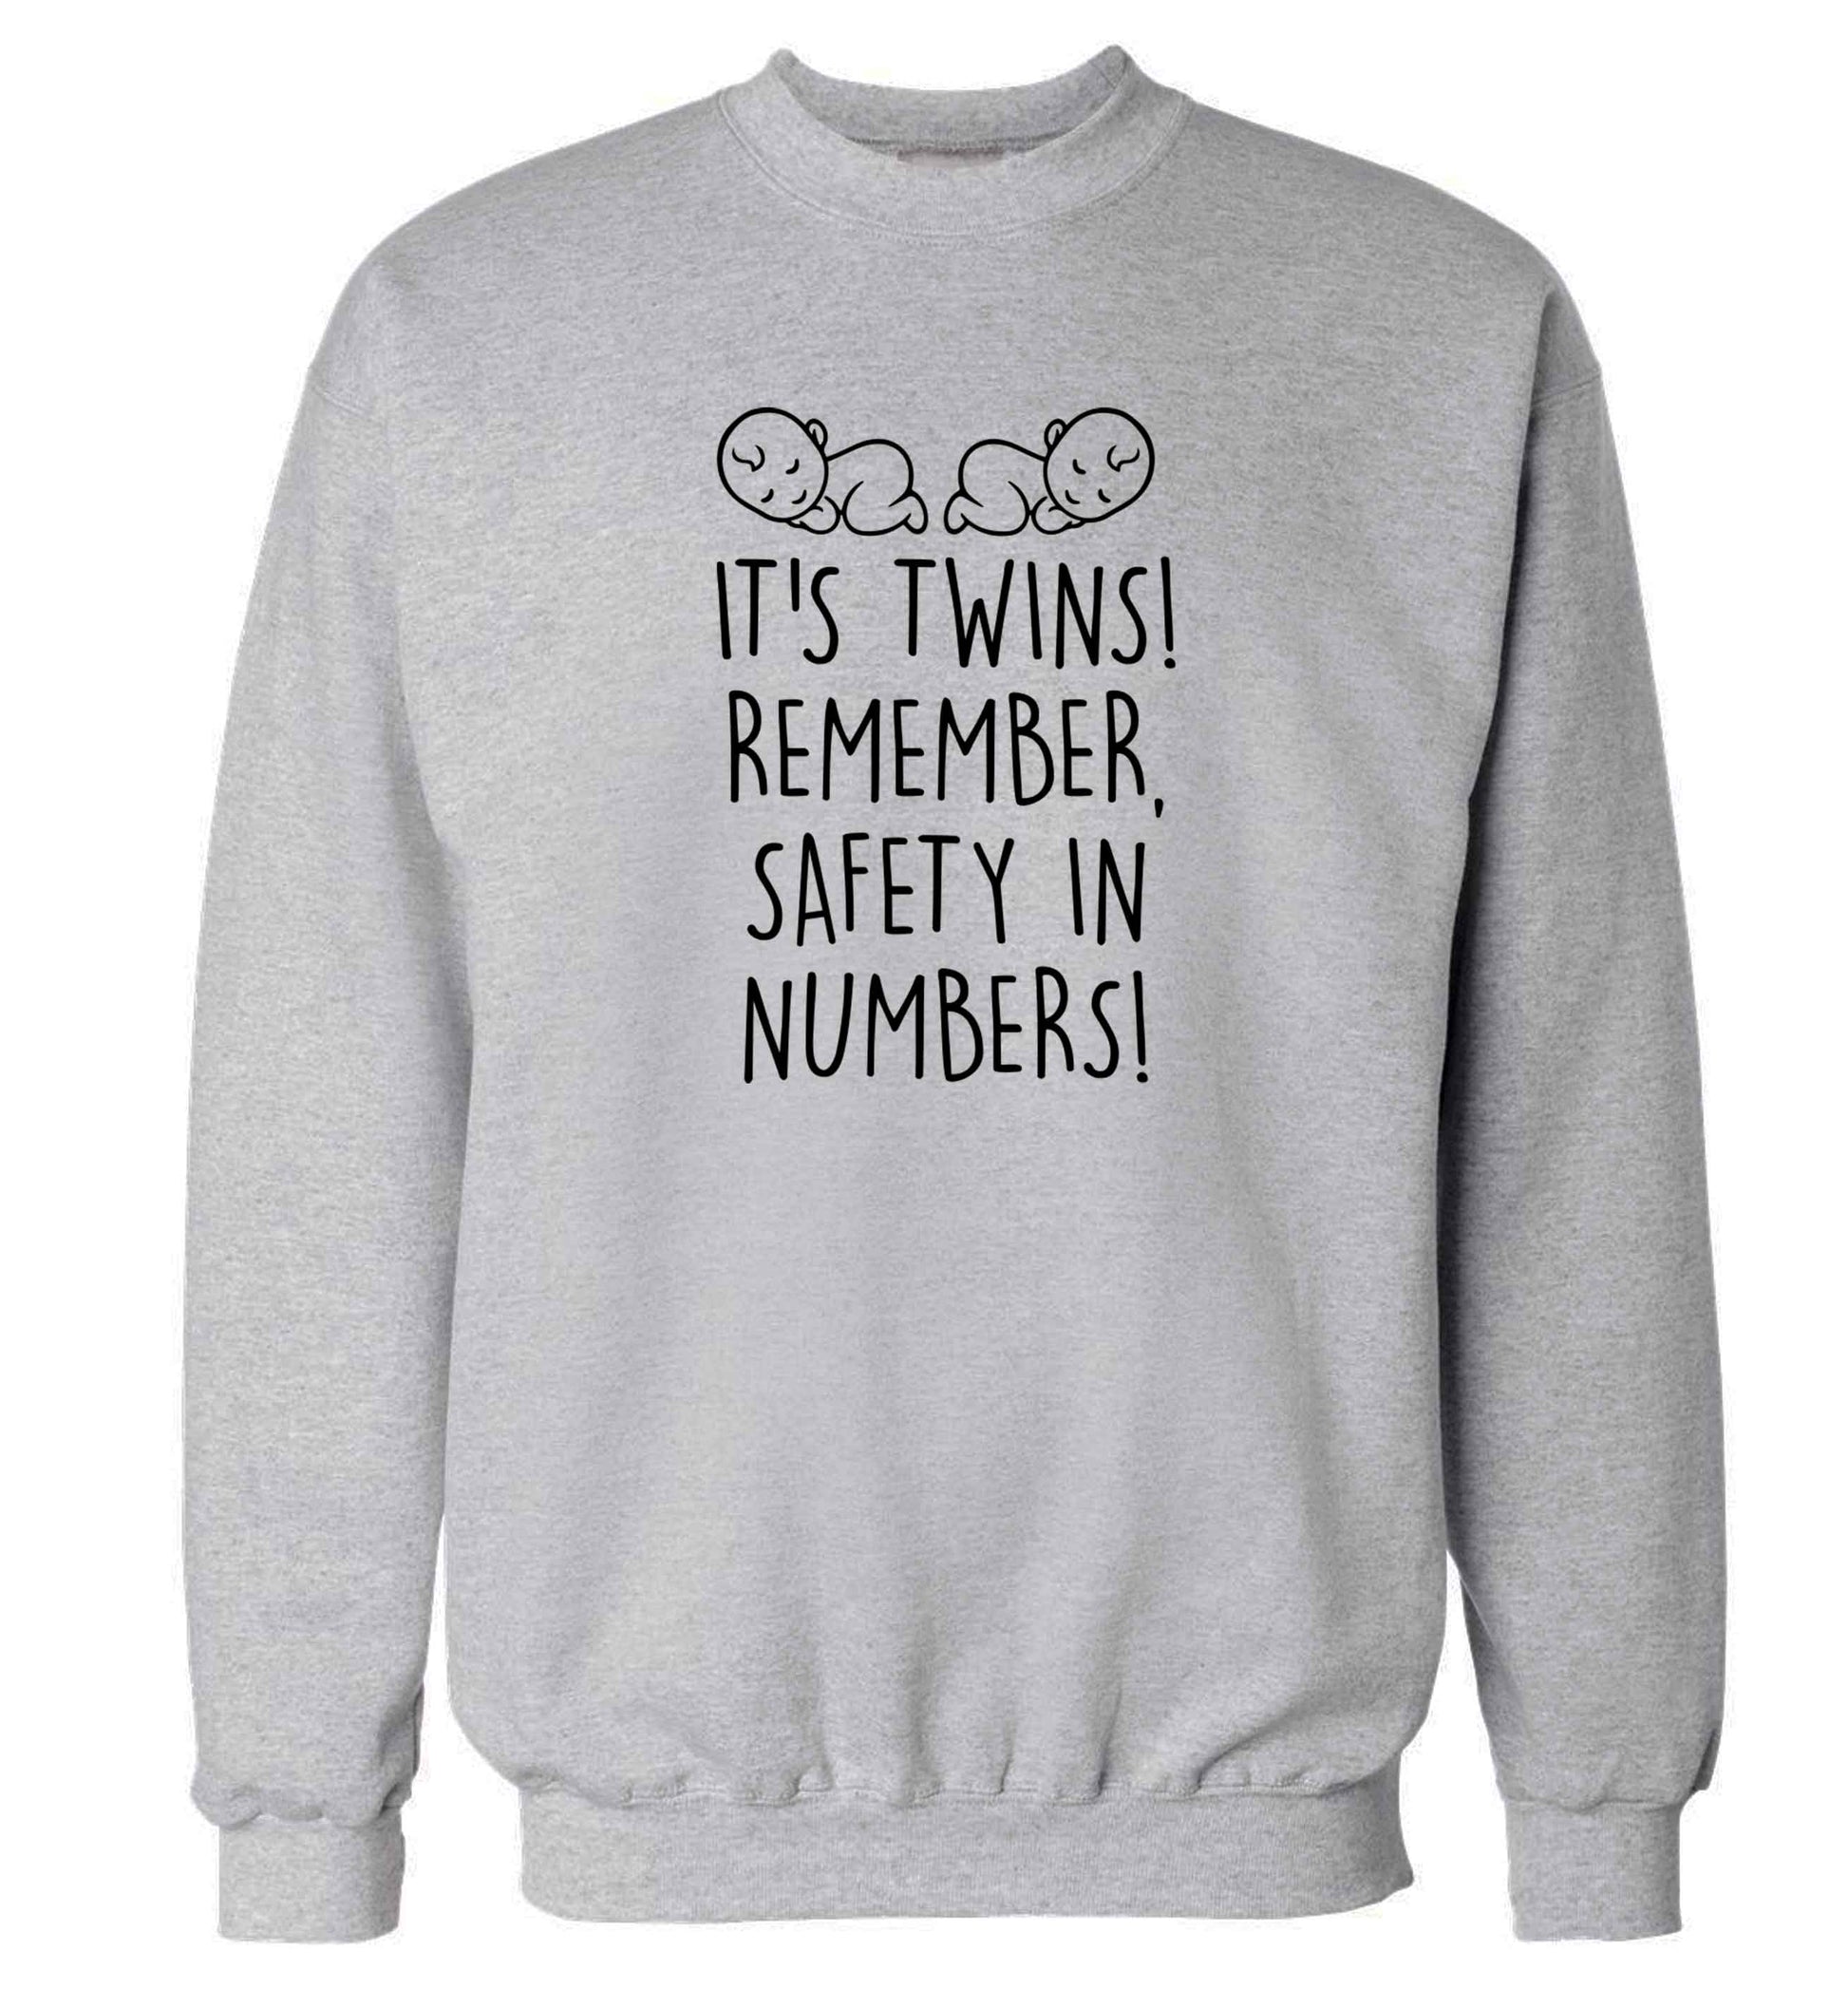 It's twins! Remember safety in numbers! adult's unisex grey sweater 2XL